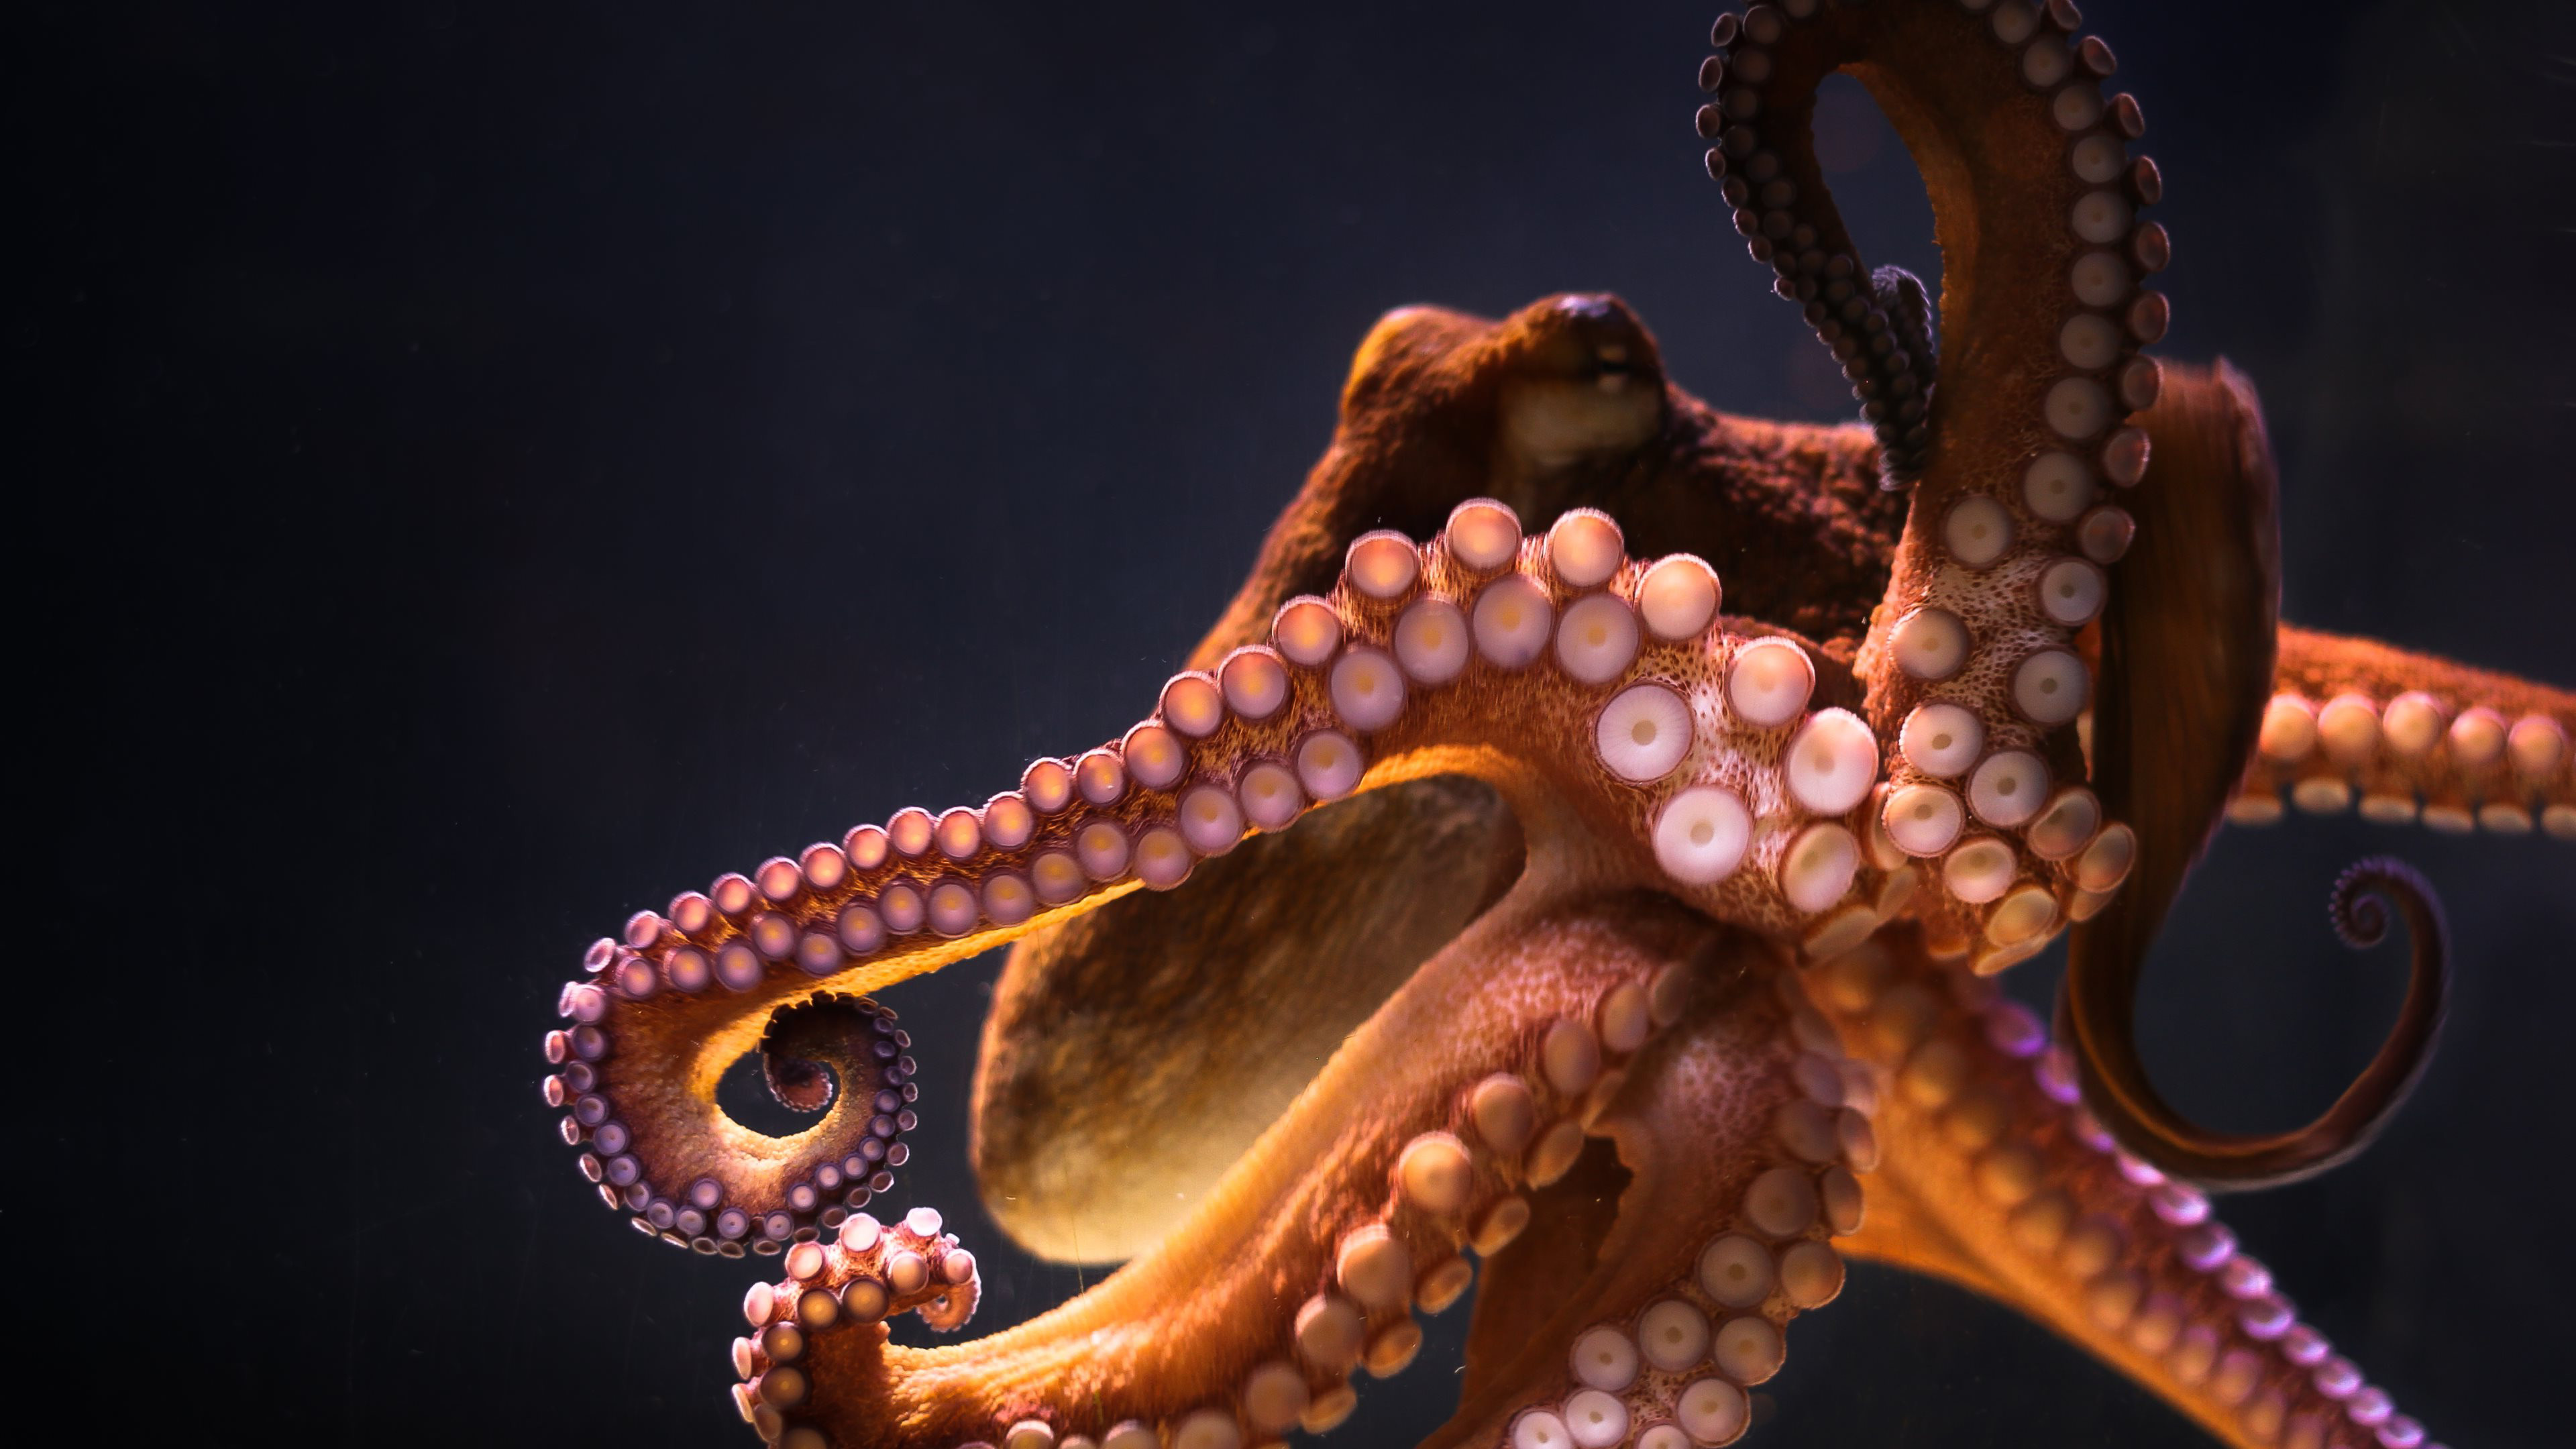 3840x2160 wallpaper backgrounds doggone animal wallpapers and Â· animals octopus hd ...